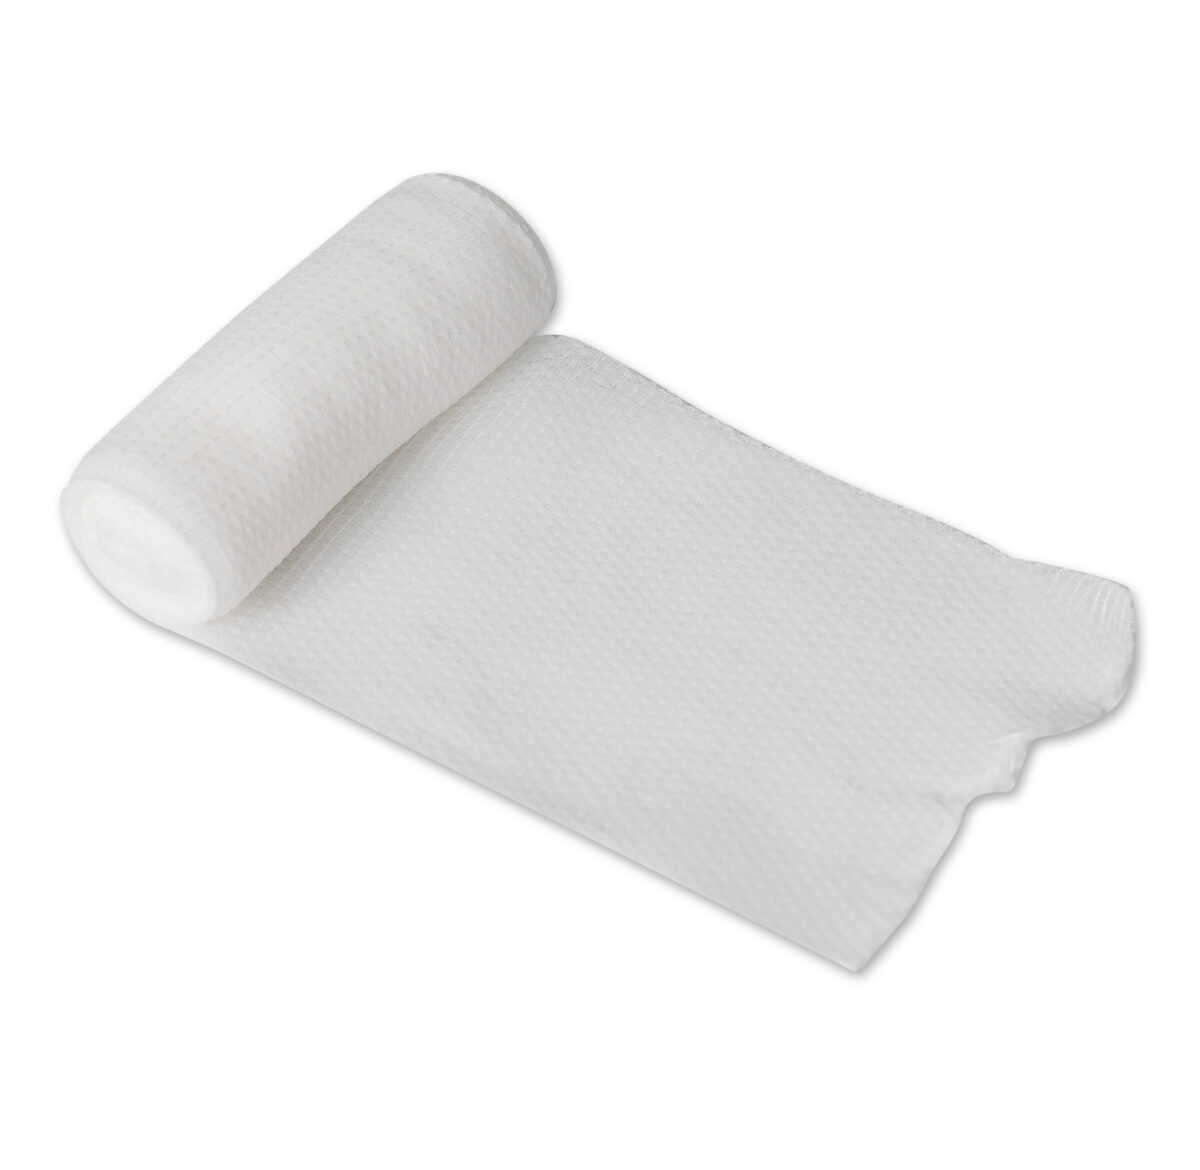 lightning x conforming stretch gauze roll rolled roller bandage 3" x 4.1yd individually wrapped